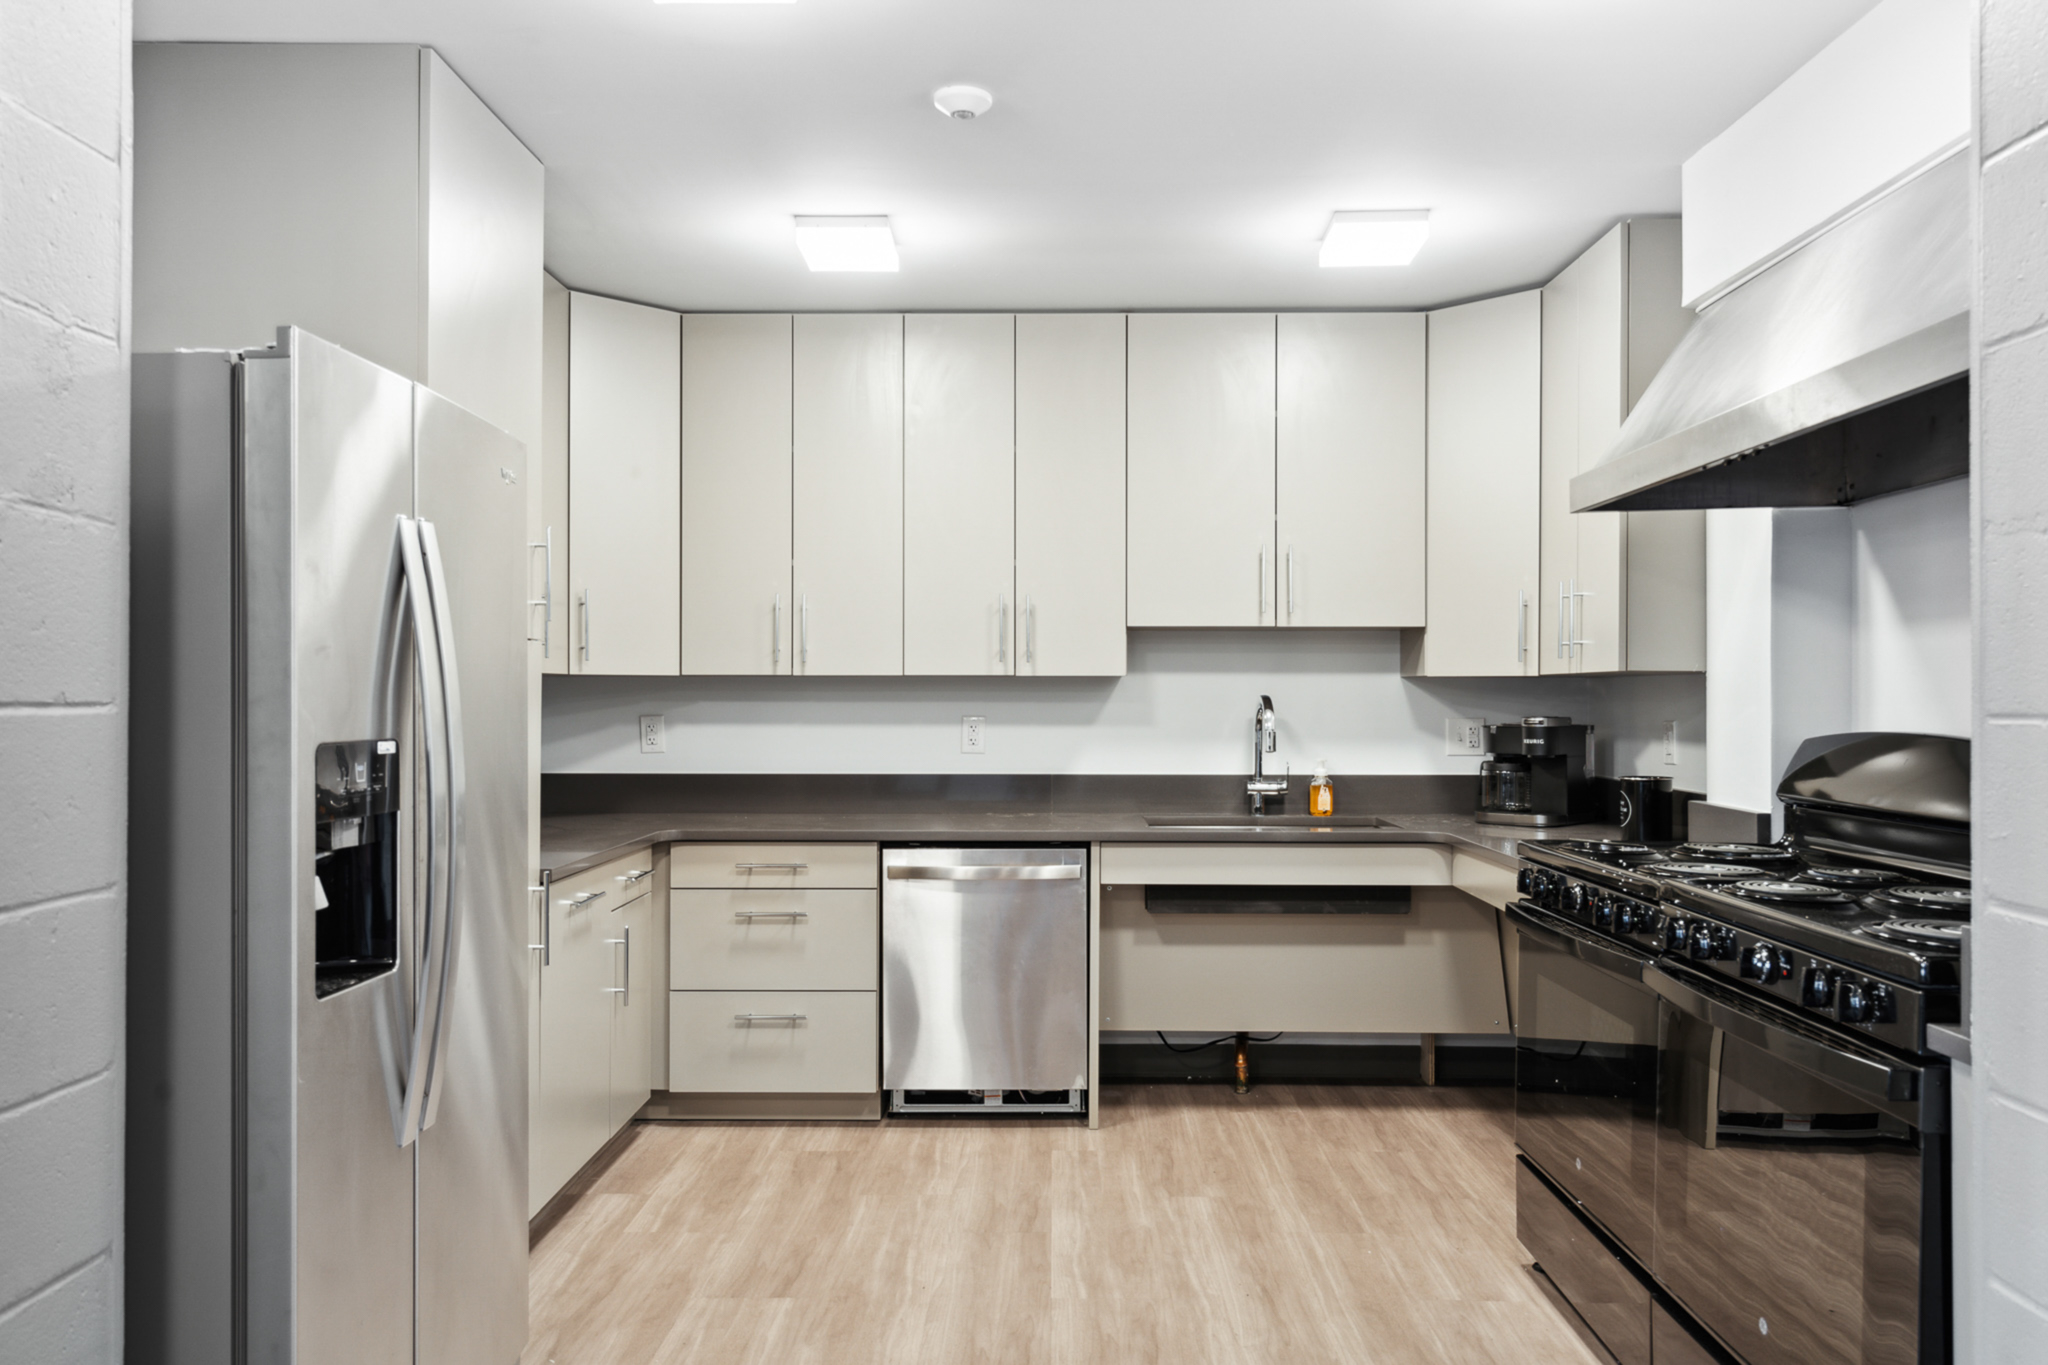 Accesible kitchen. Wheel chair accessible sink. Ample counterspace. Upgraded appliances. Stainless steel appliances. Large overhead cabinets. Custom cabinets. Stainless steel dishwasher. Stainless steel fridge. Stainless steel oven hood. Dual ovens. New flooring. Updated paint. 